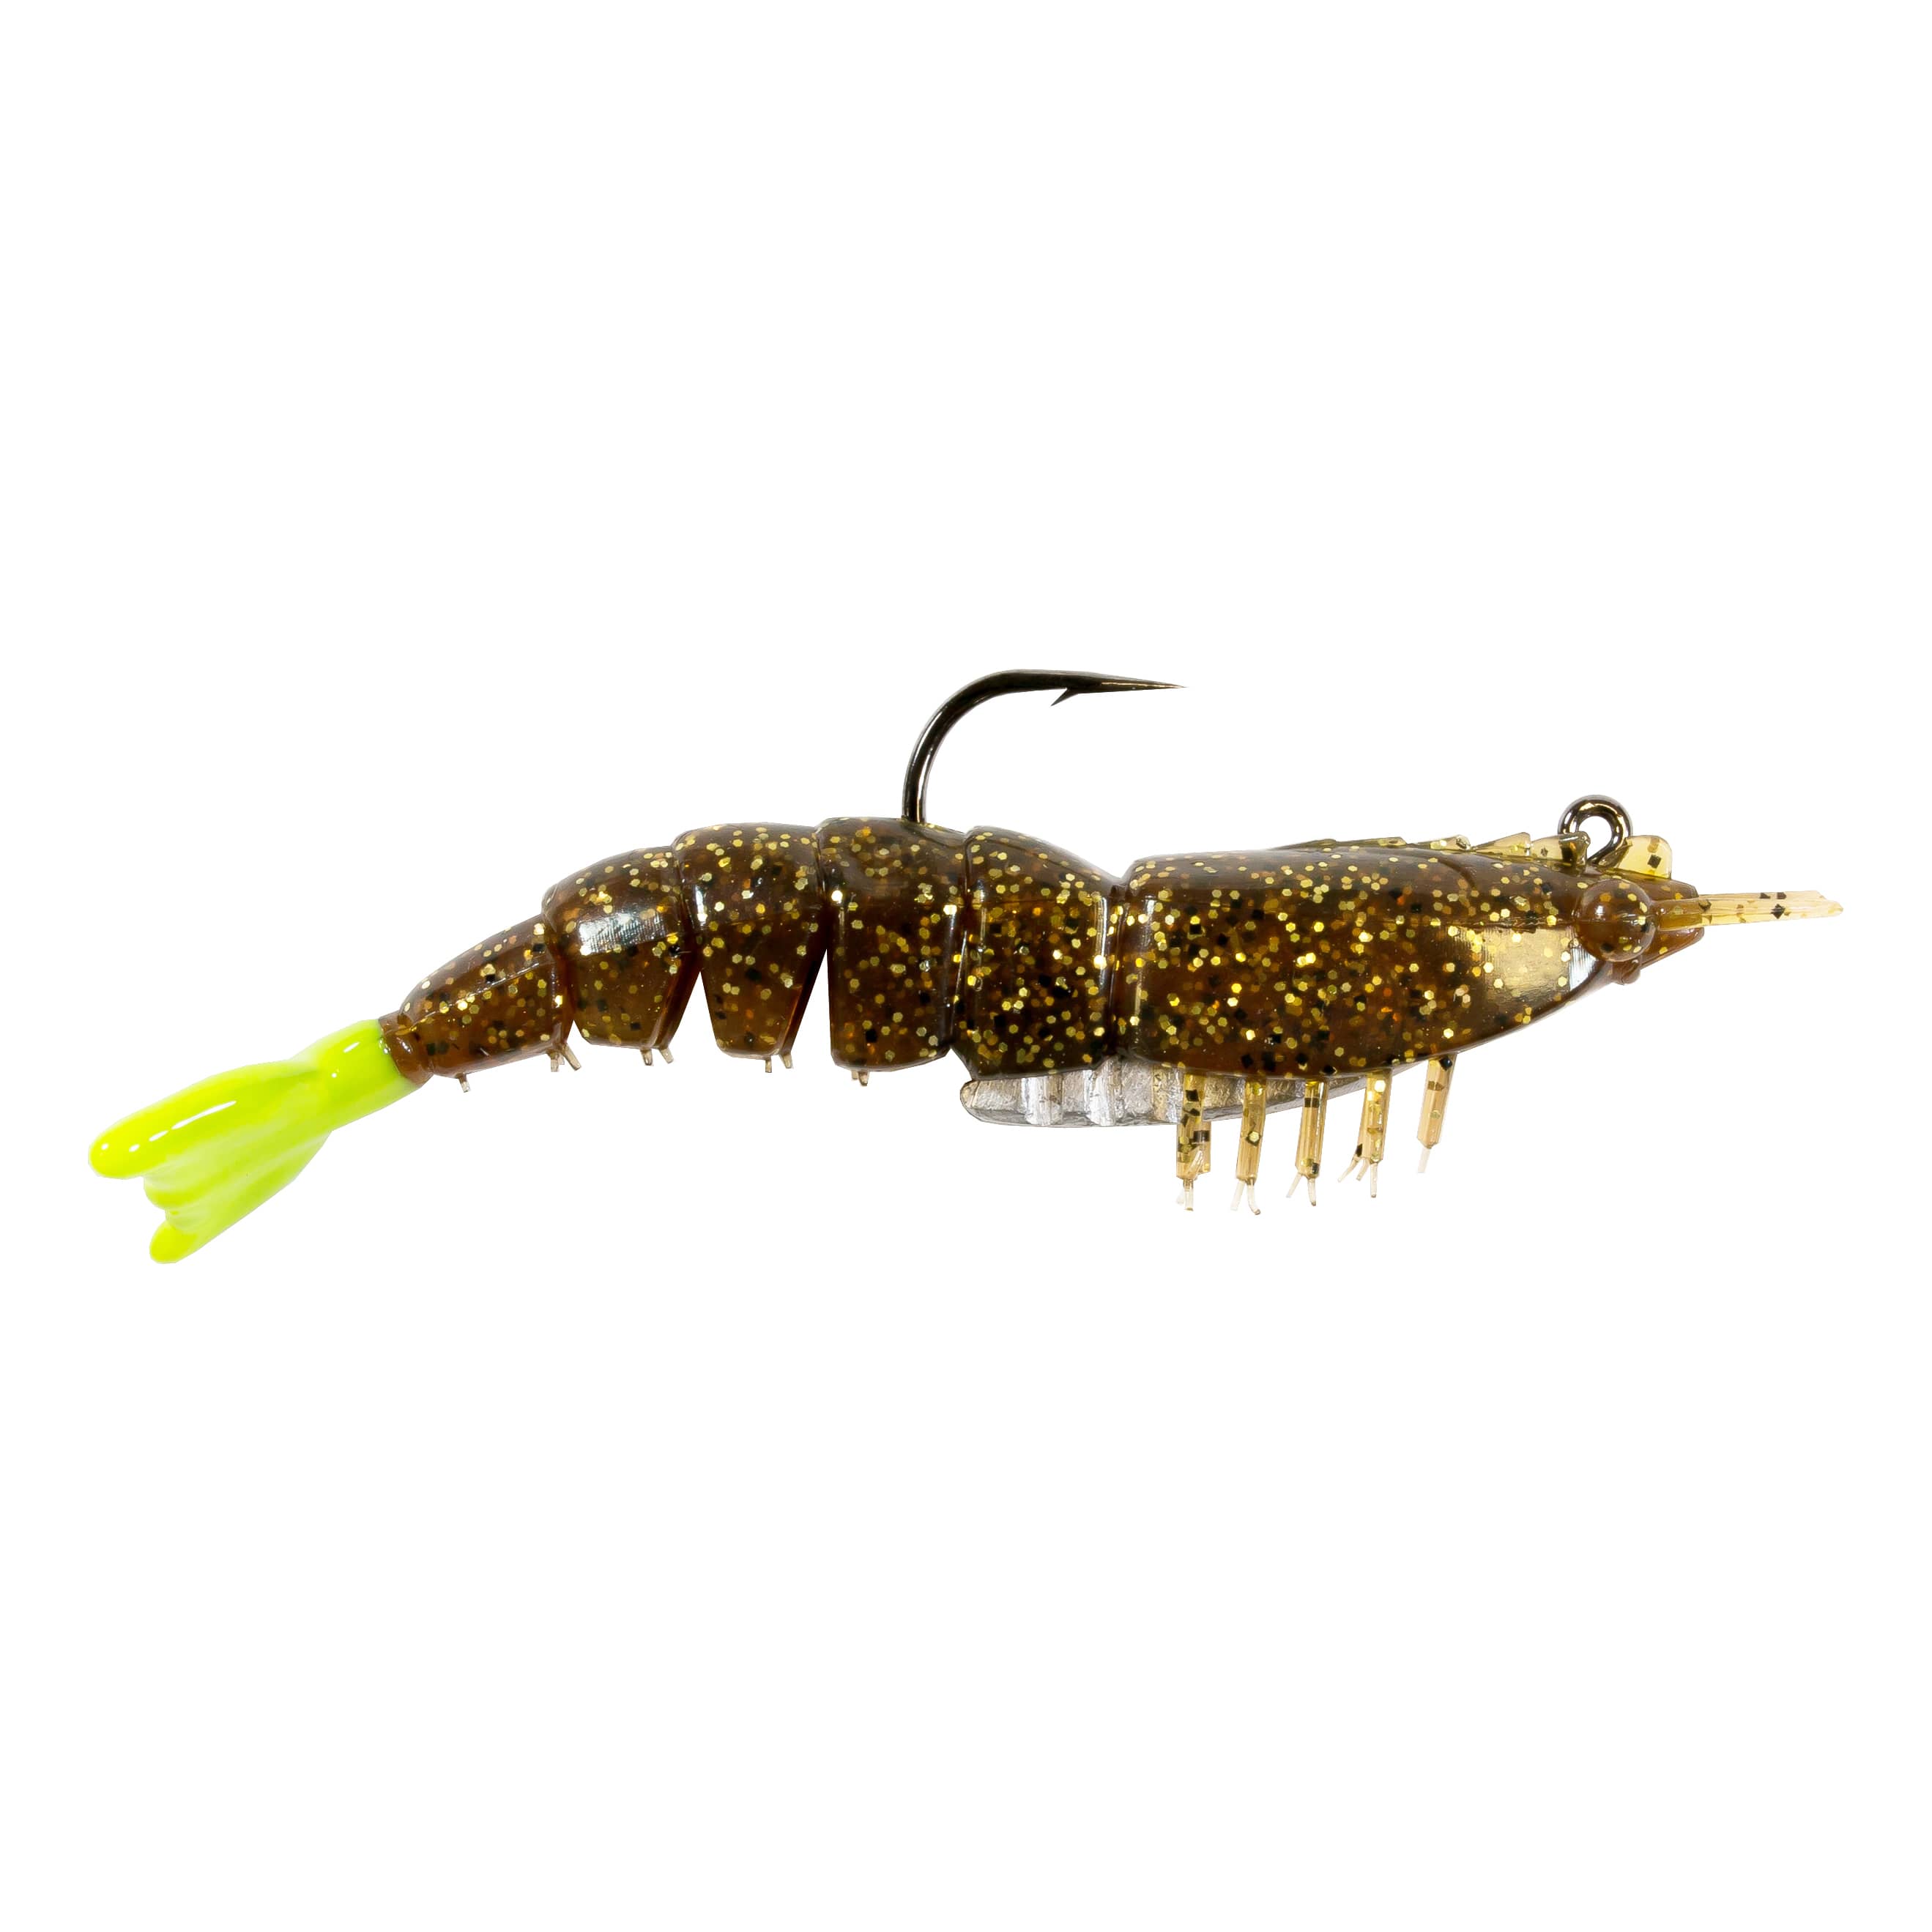 Z-Man® EZ ShrimpZ™ Rigged - Rootbeer/Chartreuse Tail